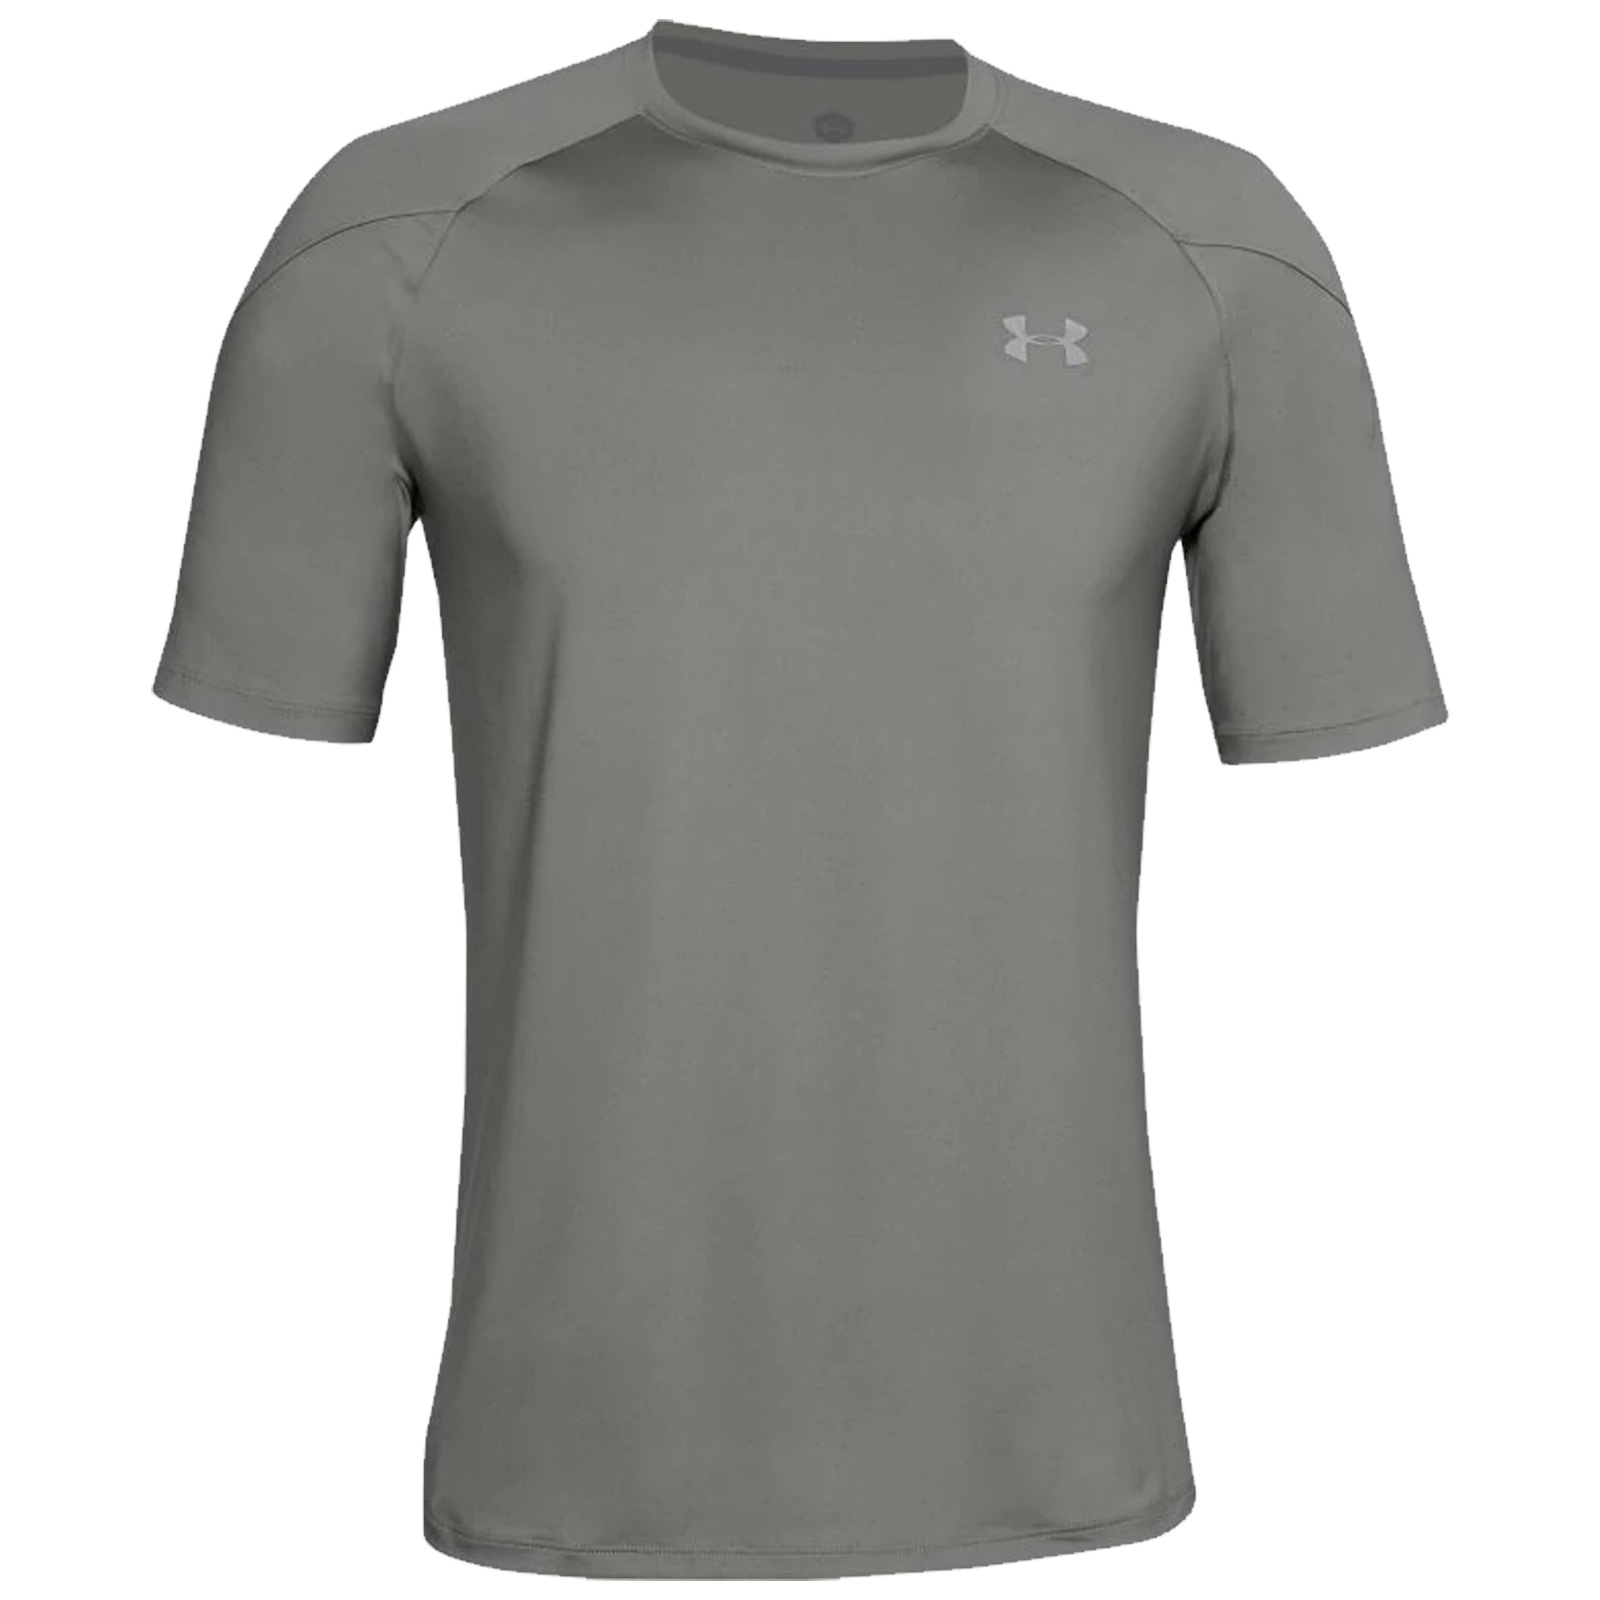 2020 Under Armour Mens Athlete Recovery Celliant T-Shirt Wicking Energy ...